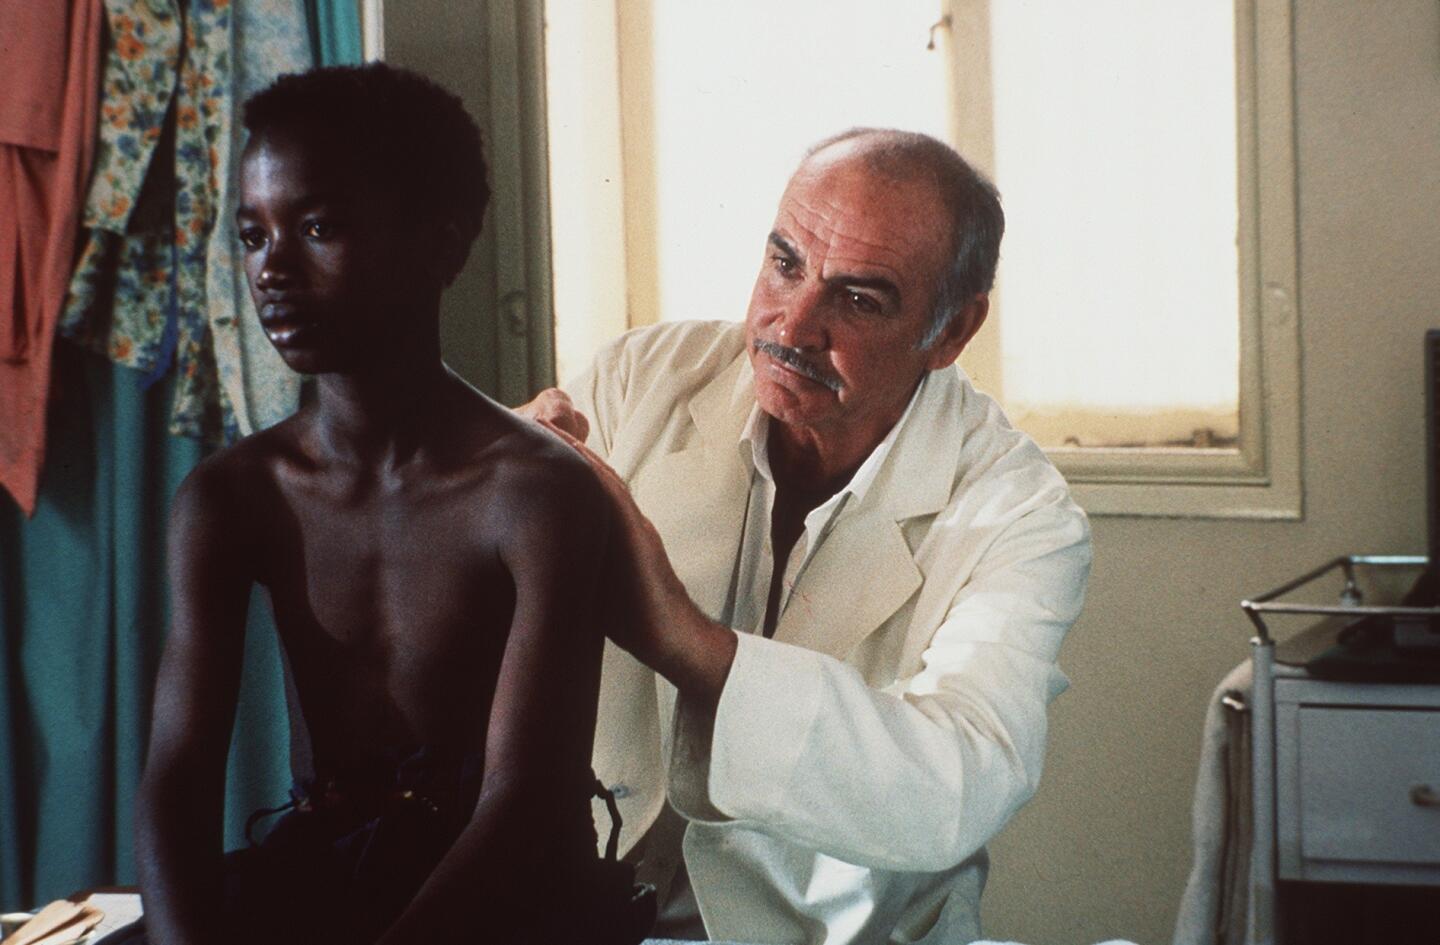 Connery stars as West African physician Dr. Alex Murray in "A Good Man in Africa."